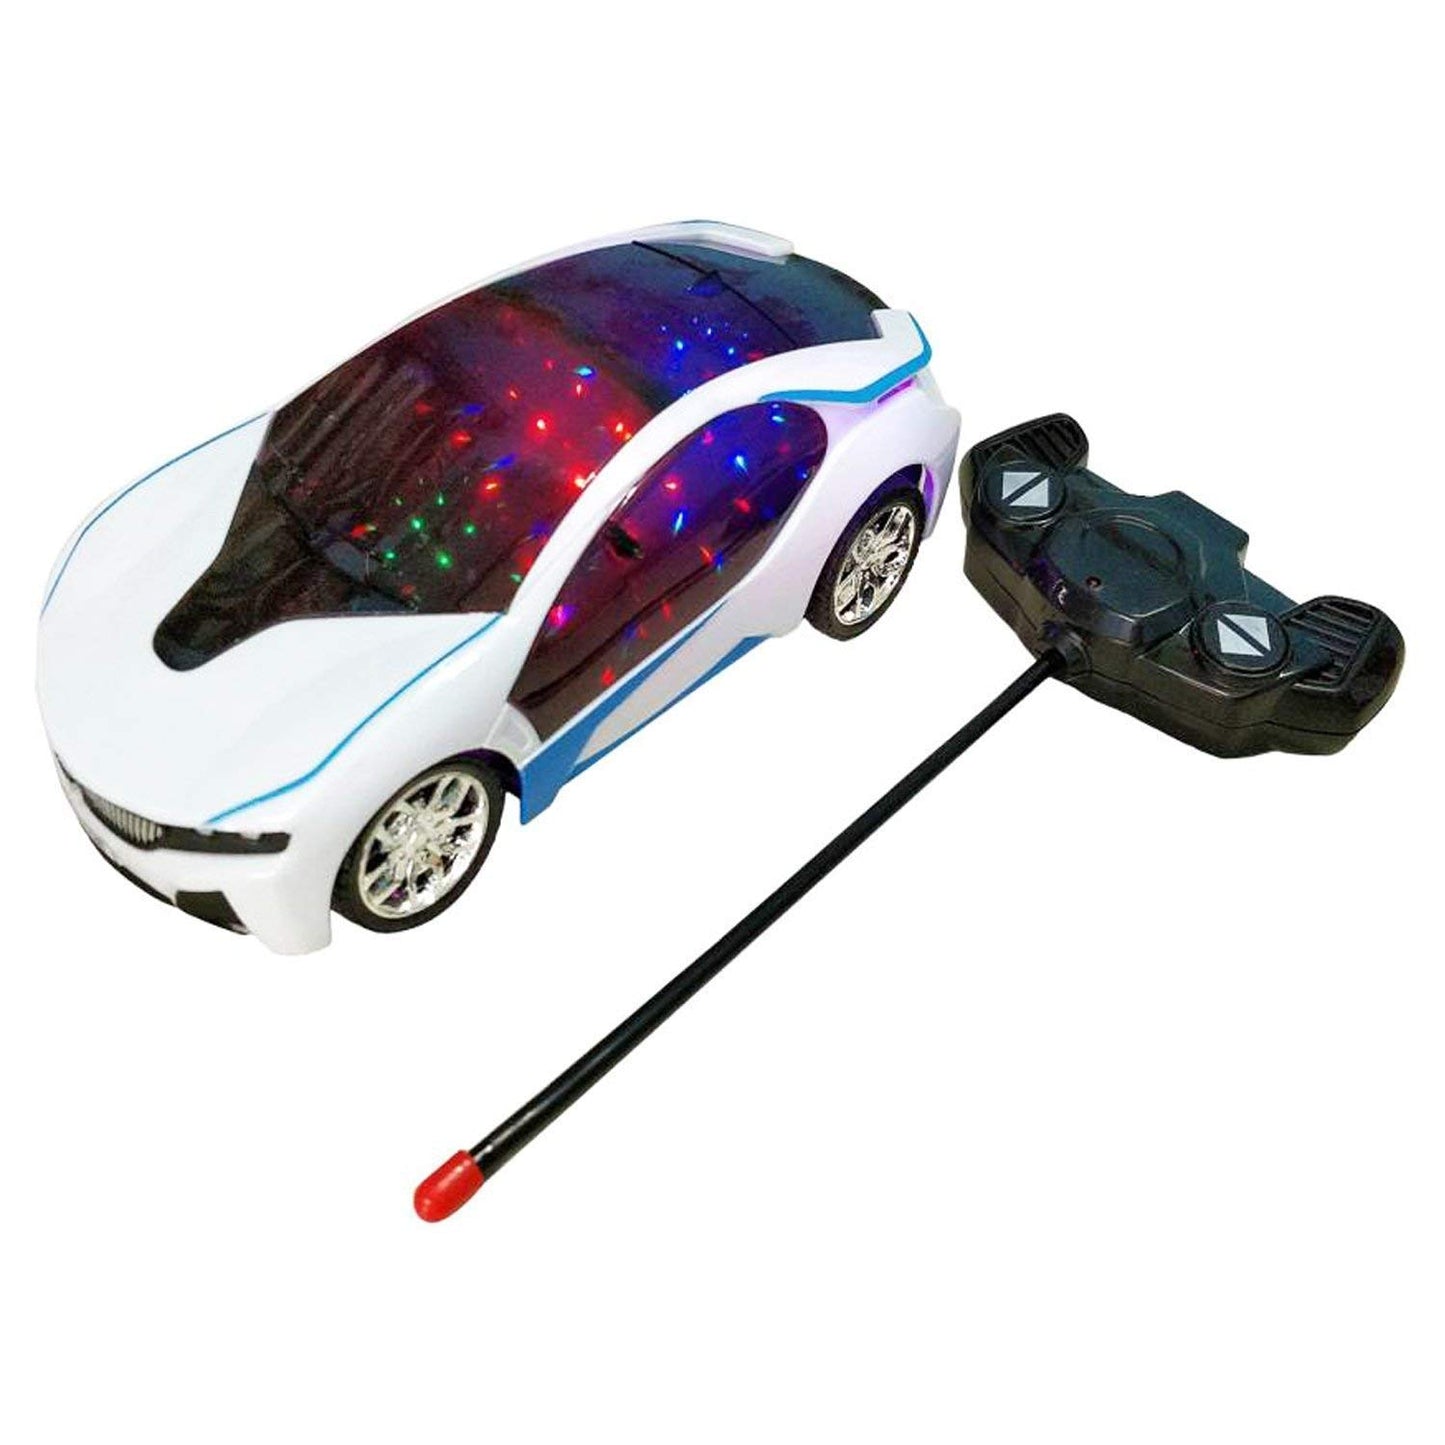 Azi 3D Remote Control Famous CAR /Full Function Forward, Backward, Left Turn and Right Turn Stop with 3D Lights, Rechargeable car